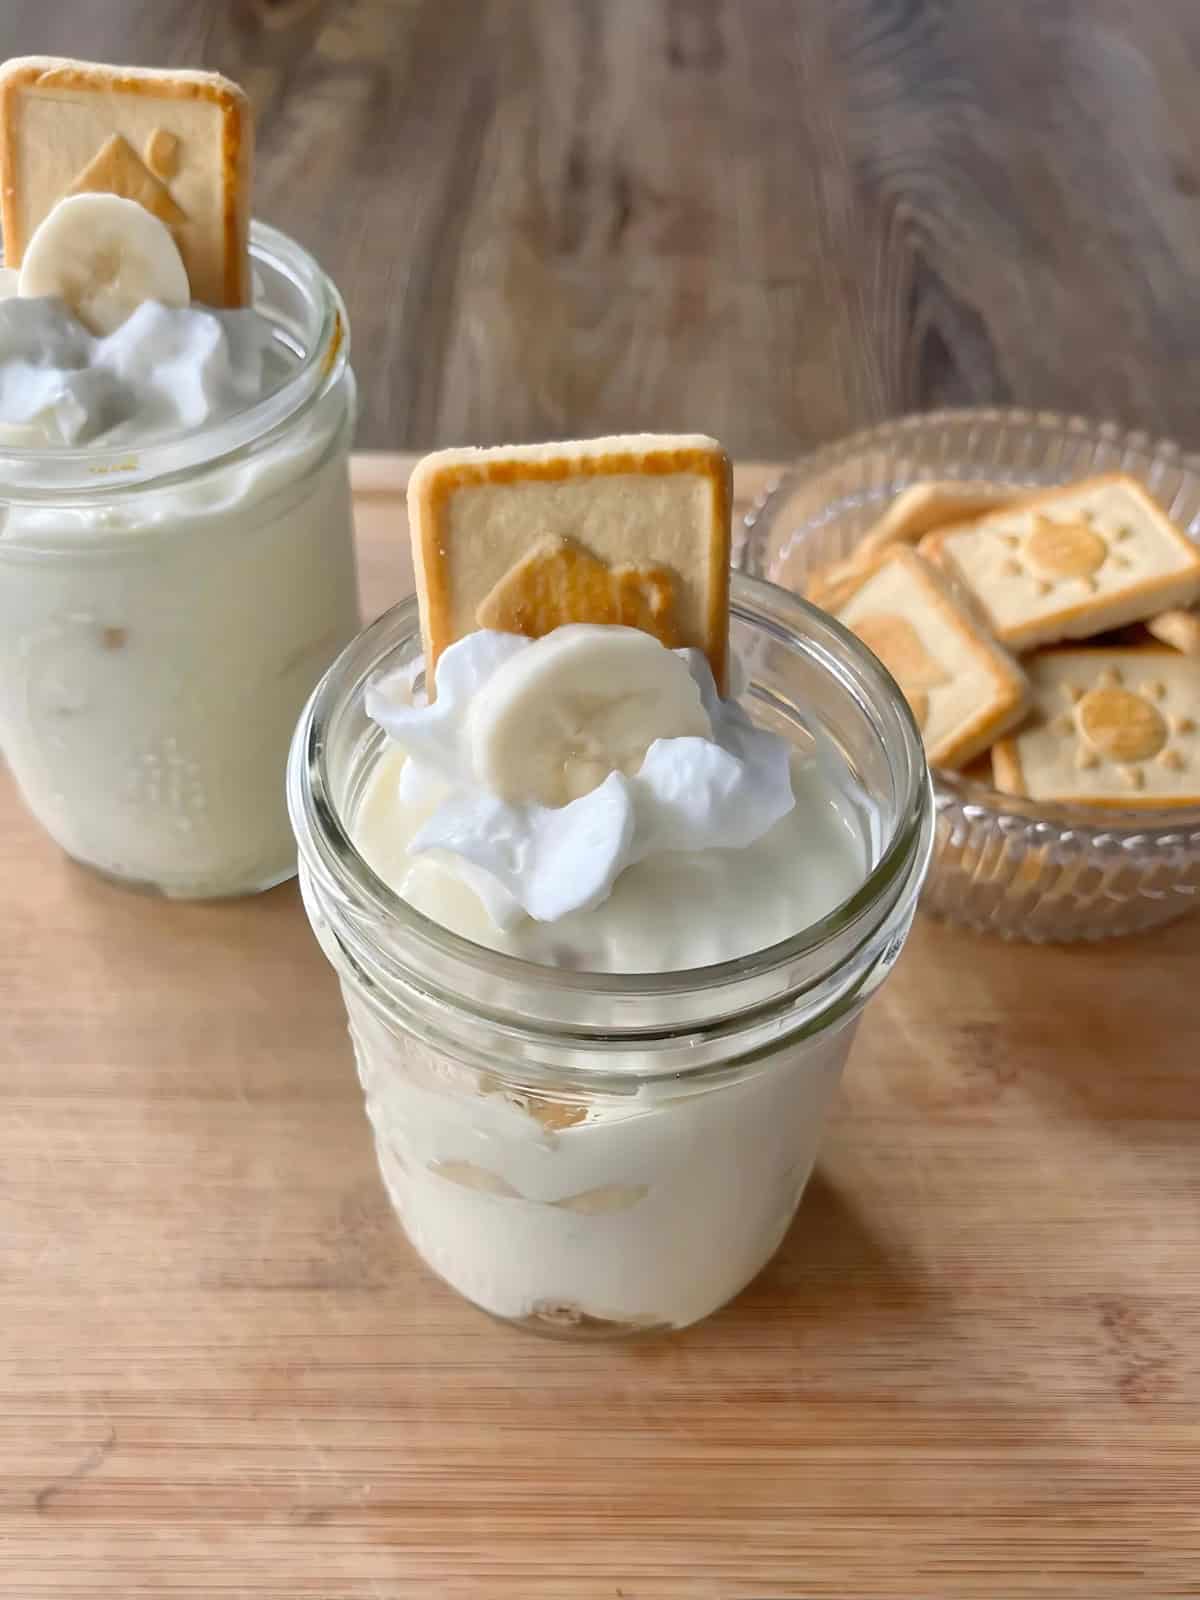 Banana pudding with Chessmen cookies and a dash of whipped cream.